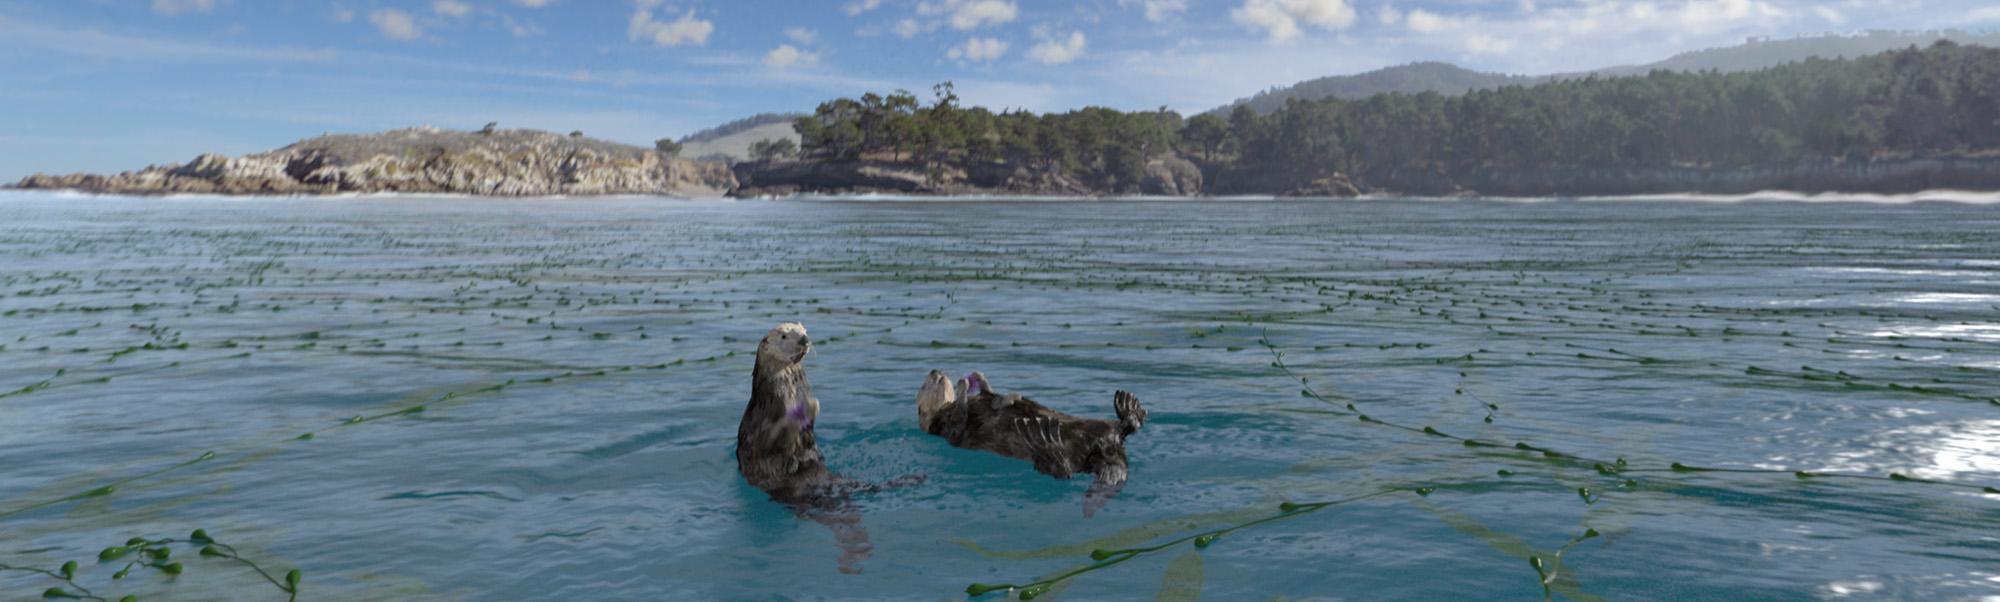 Two otters swim on their backs in bright blue water with hills in the distant background